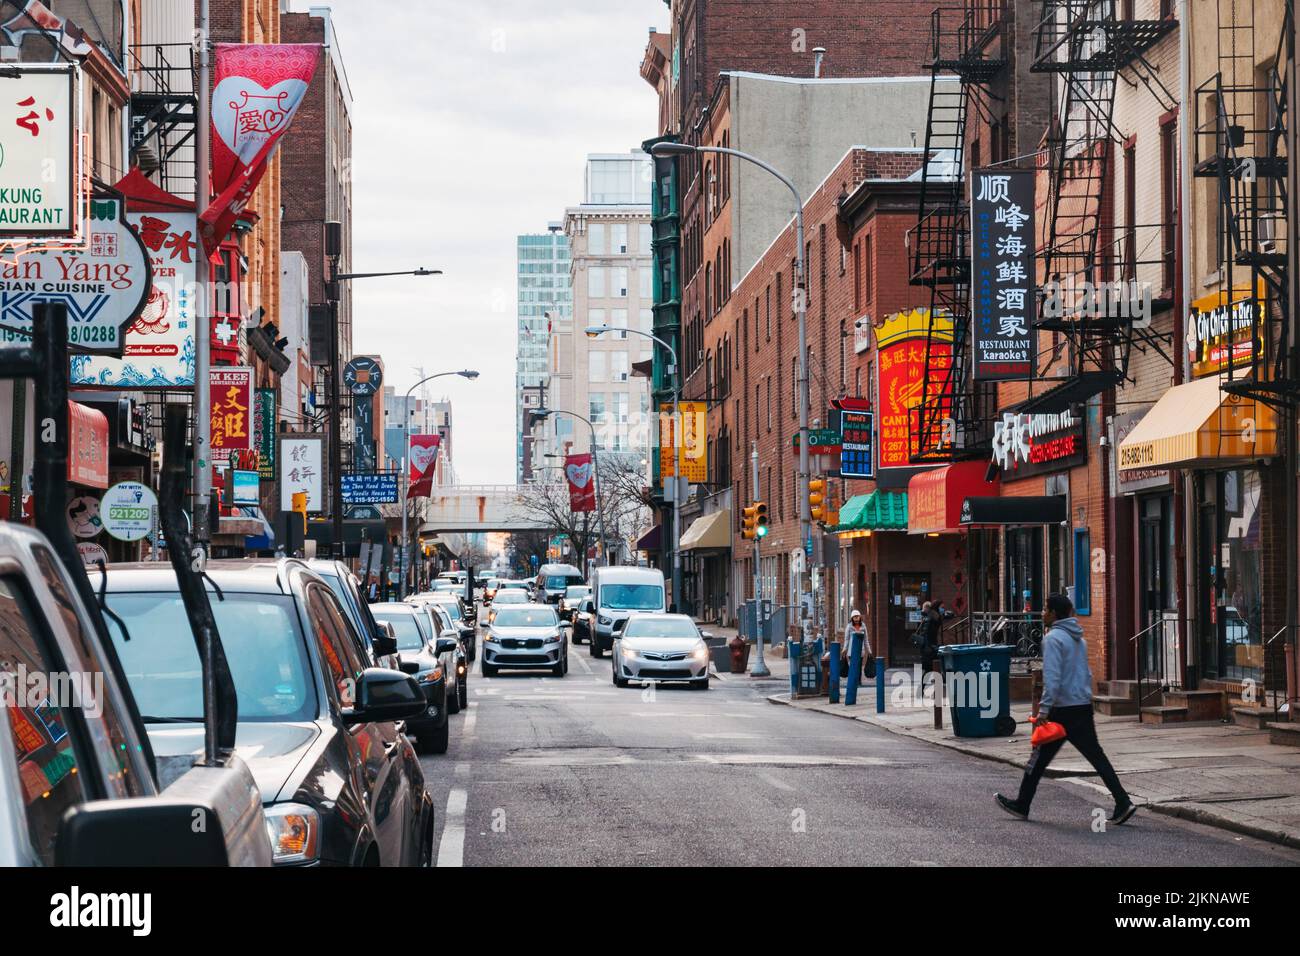 Looking down a city street in Chinatown, Philadelphia, USA Stock Photo